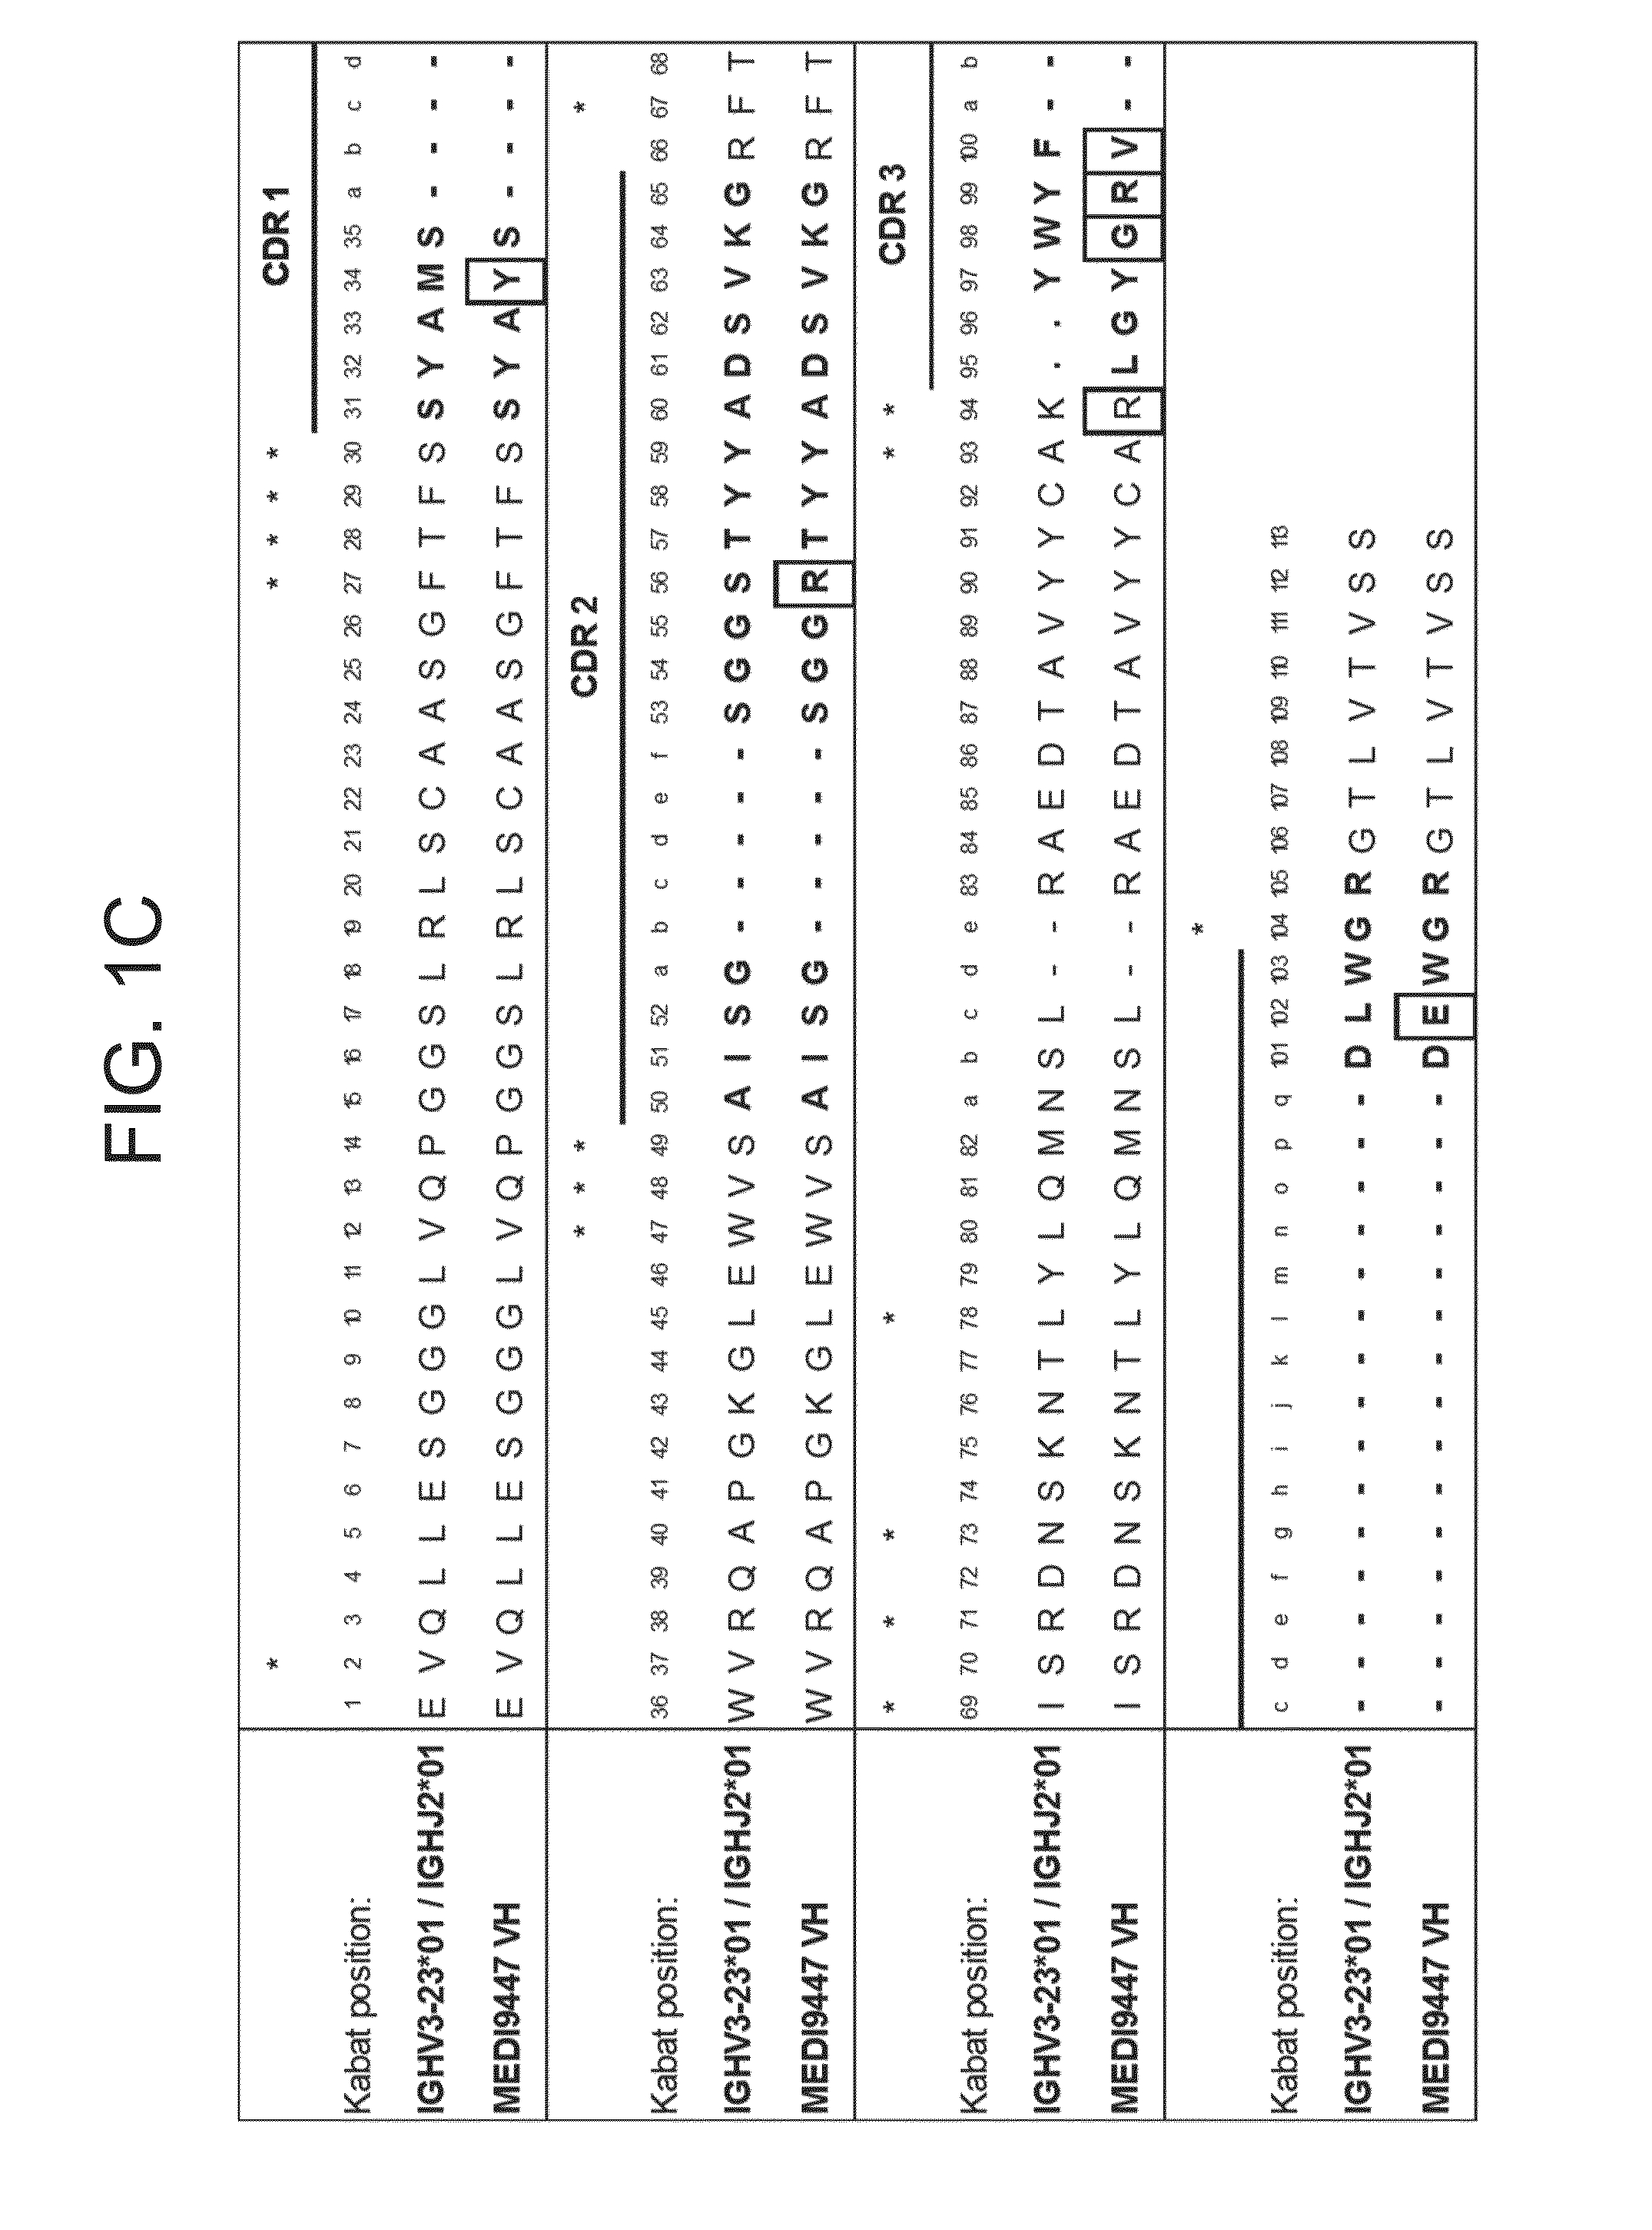 Binding molecules specific for cd73 and uses thereof